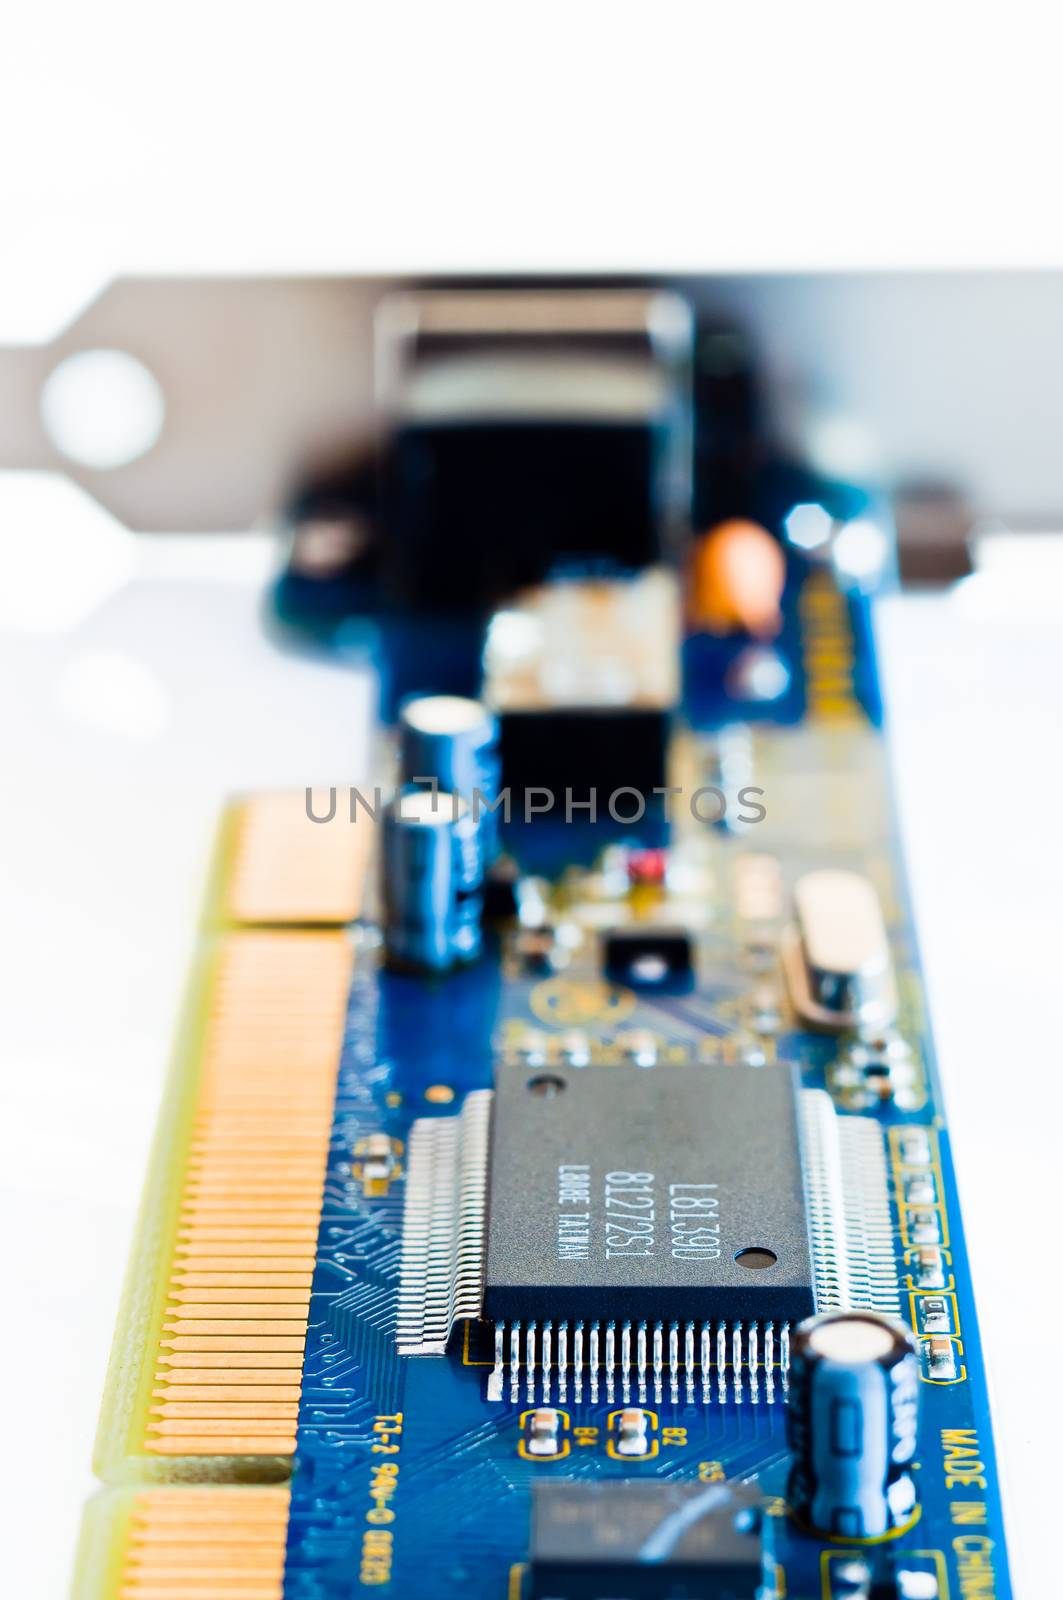 Network Interface Card by timh